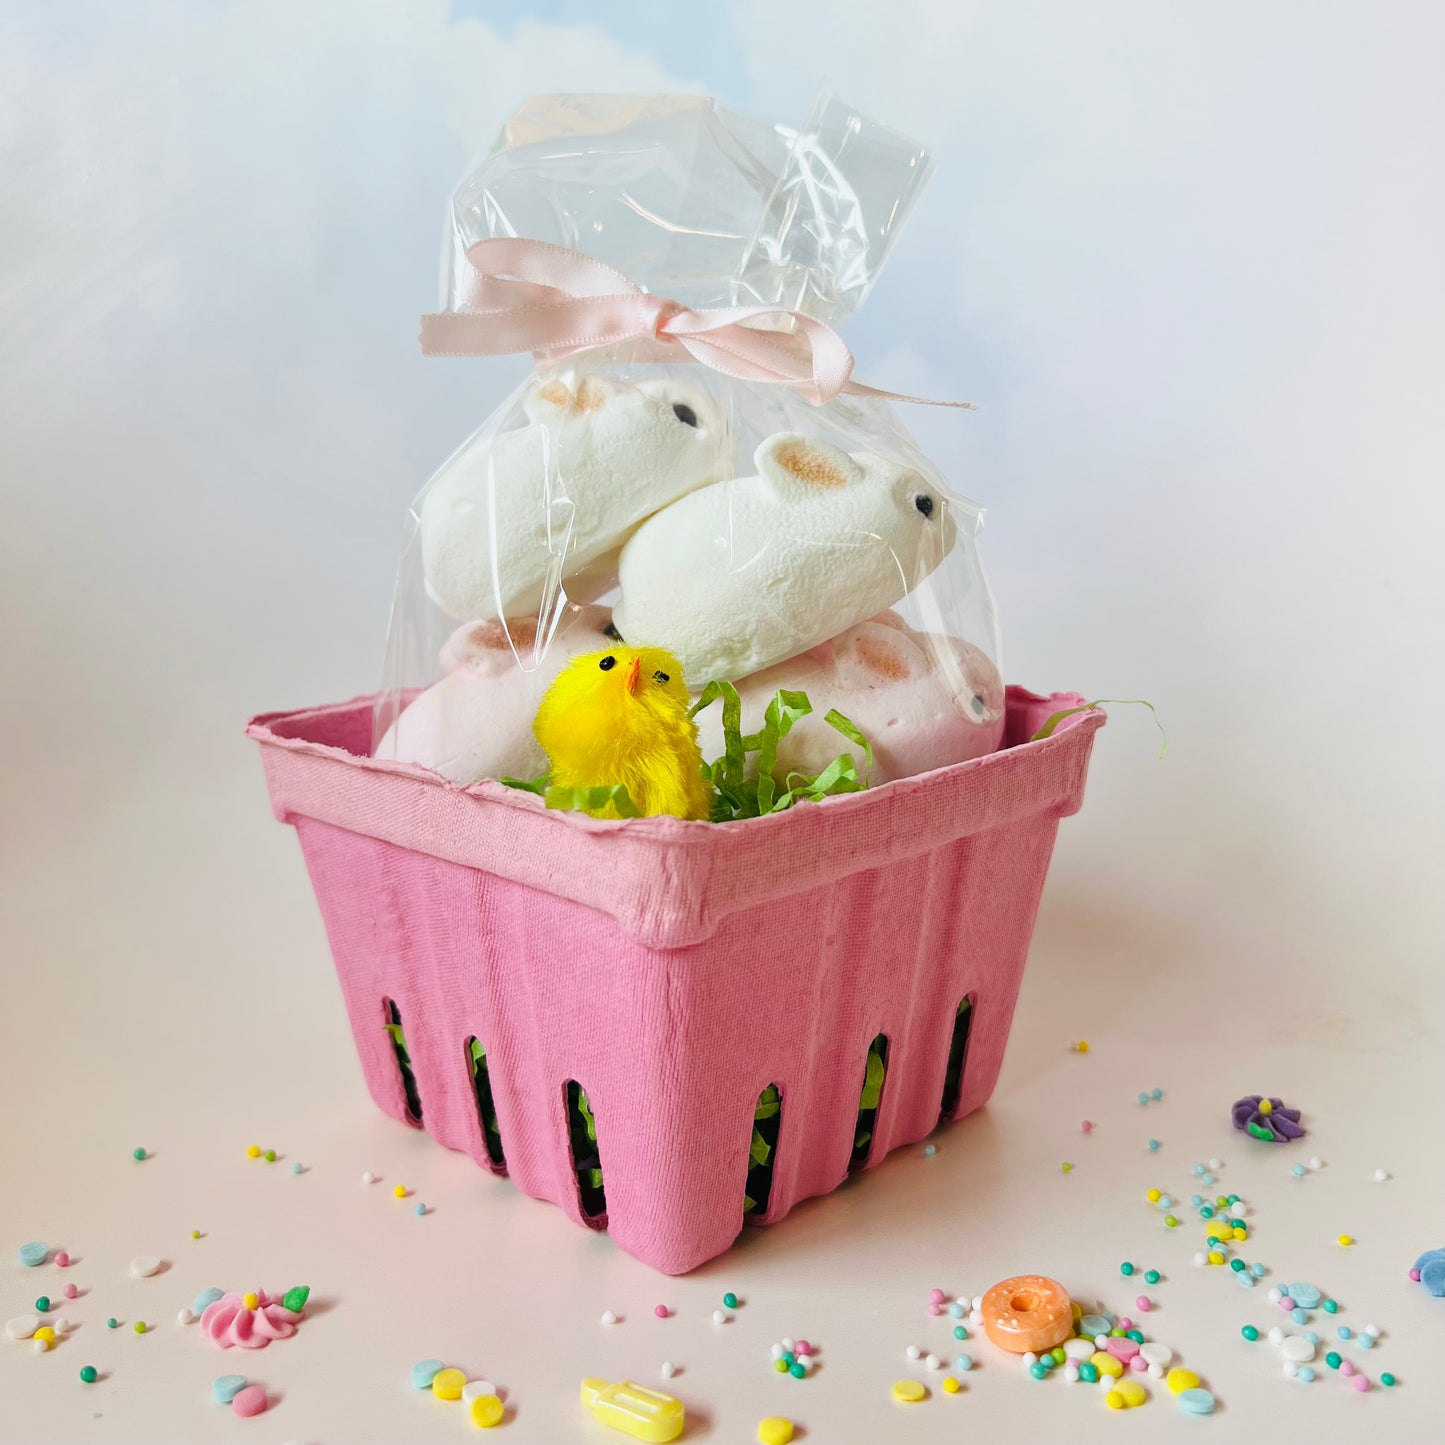 Marshmallow bunnies in a pink basket